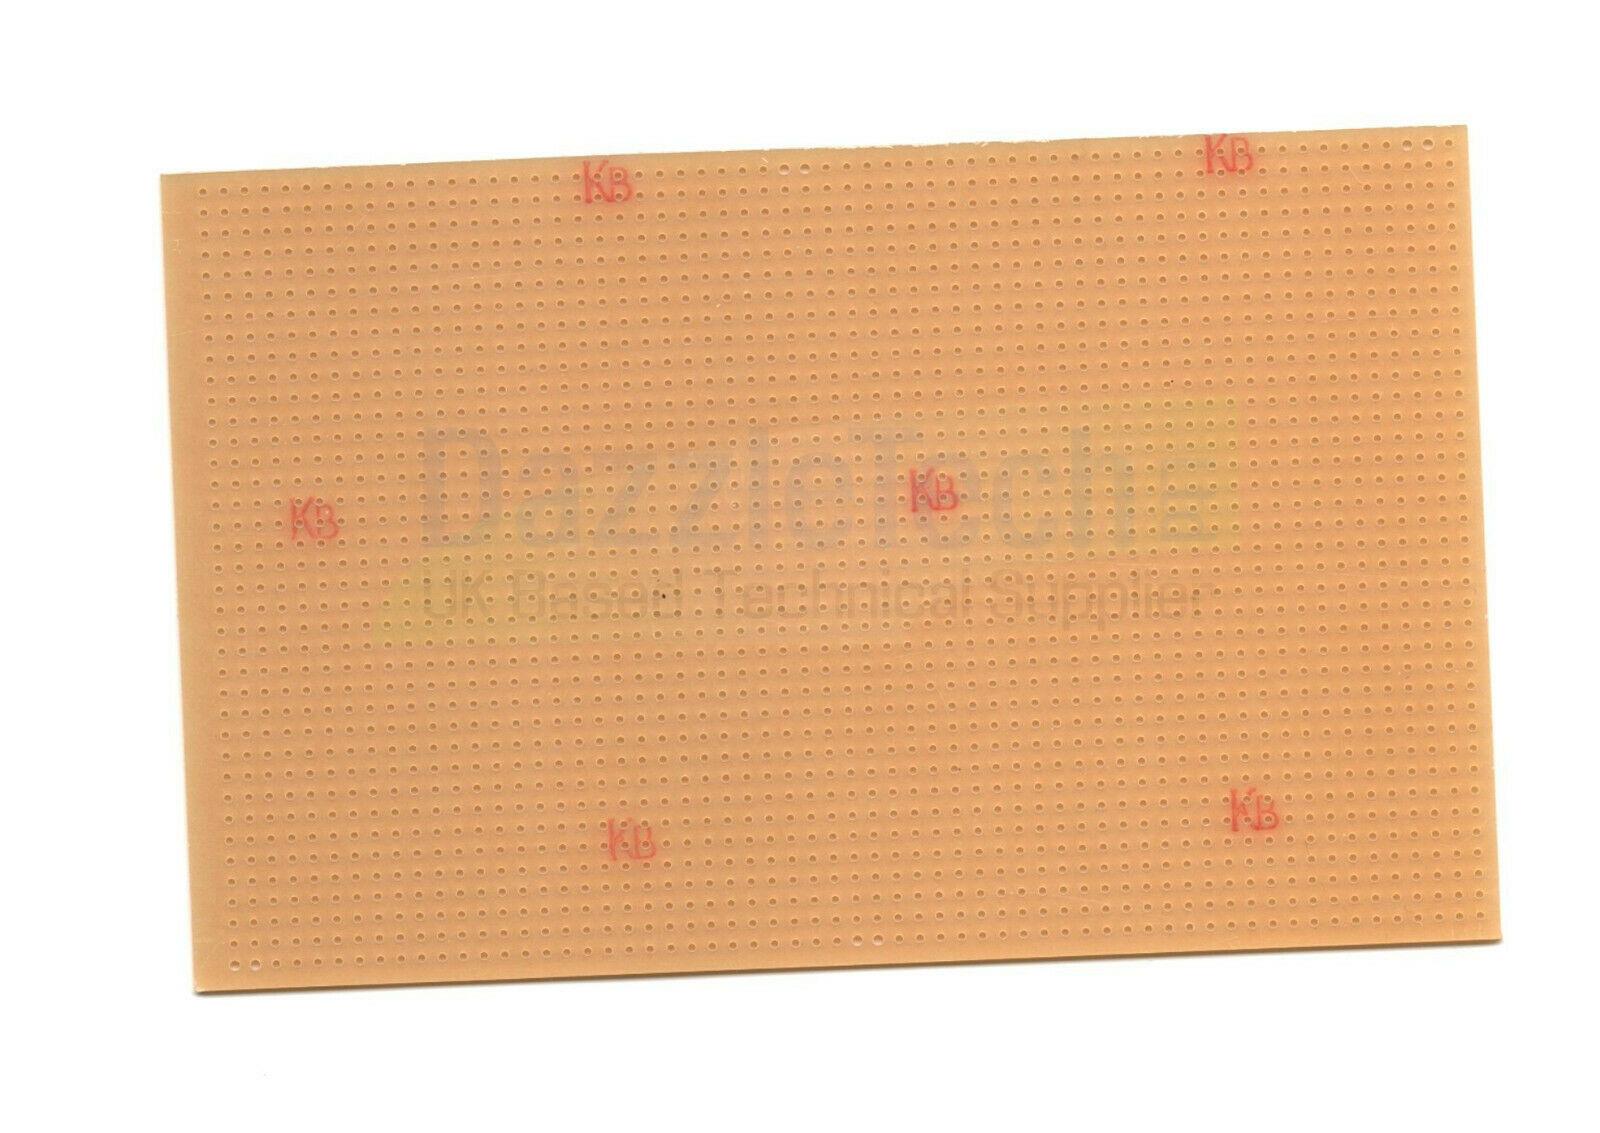 Matrix Perf Board 100x160mm 38x61 hole prototype board perf board without copper tracks